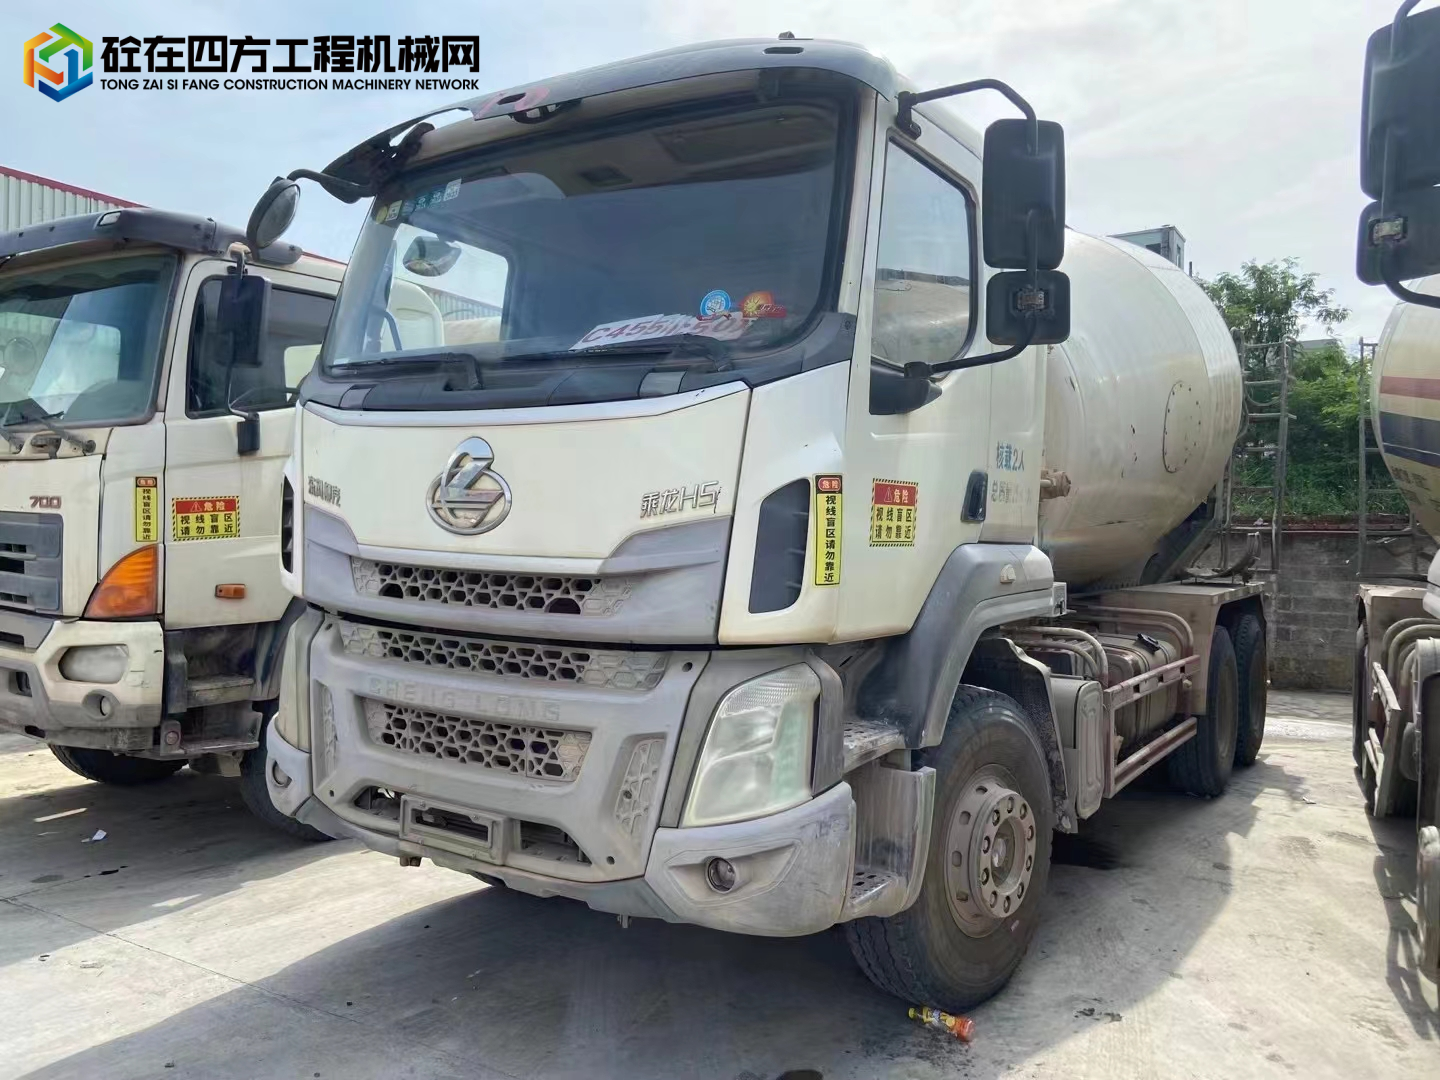 https://images.tongzsf.com/tong/truck_machine/20240605/1665fcfd16ce61.jpg